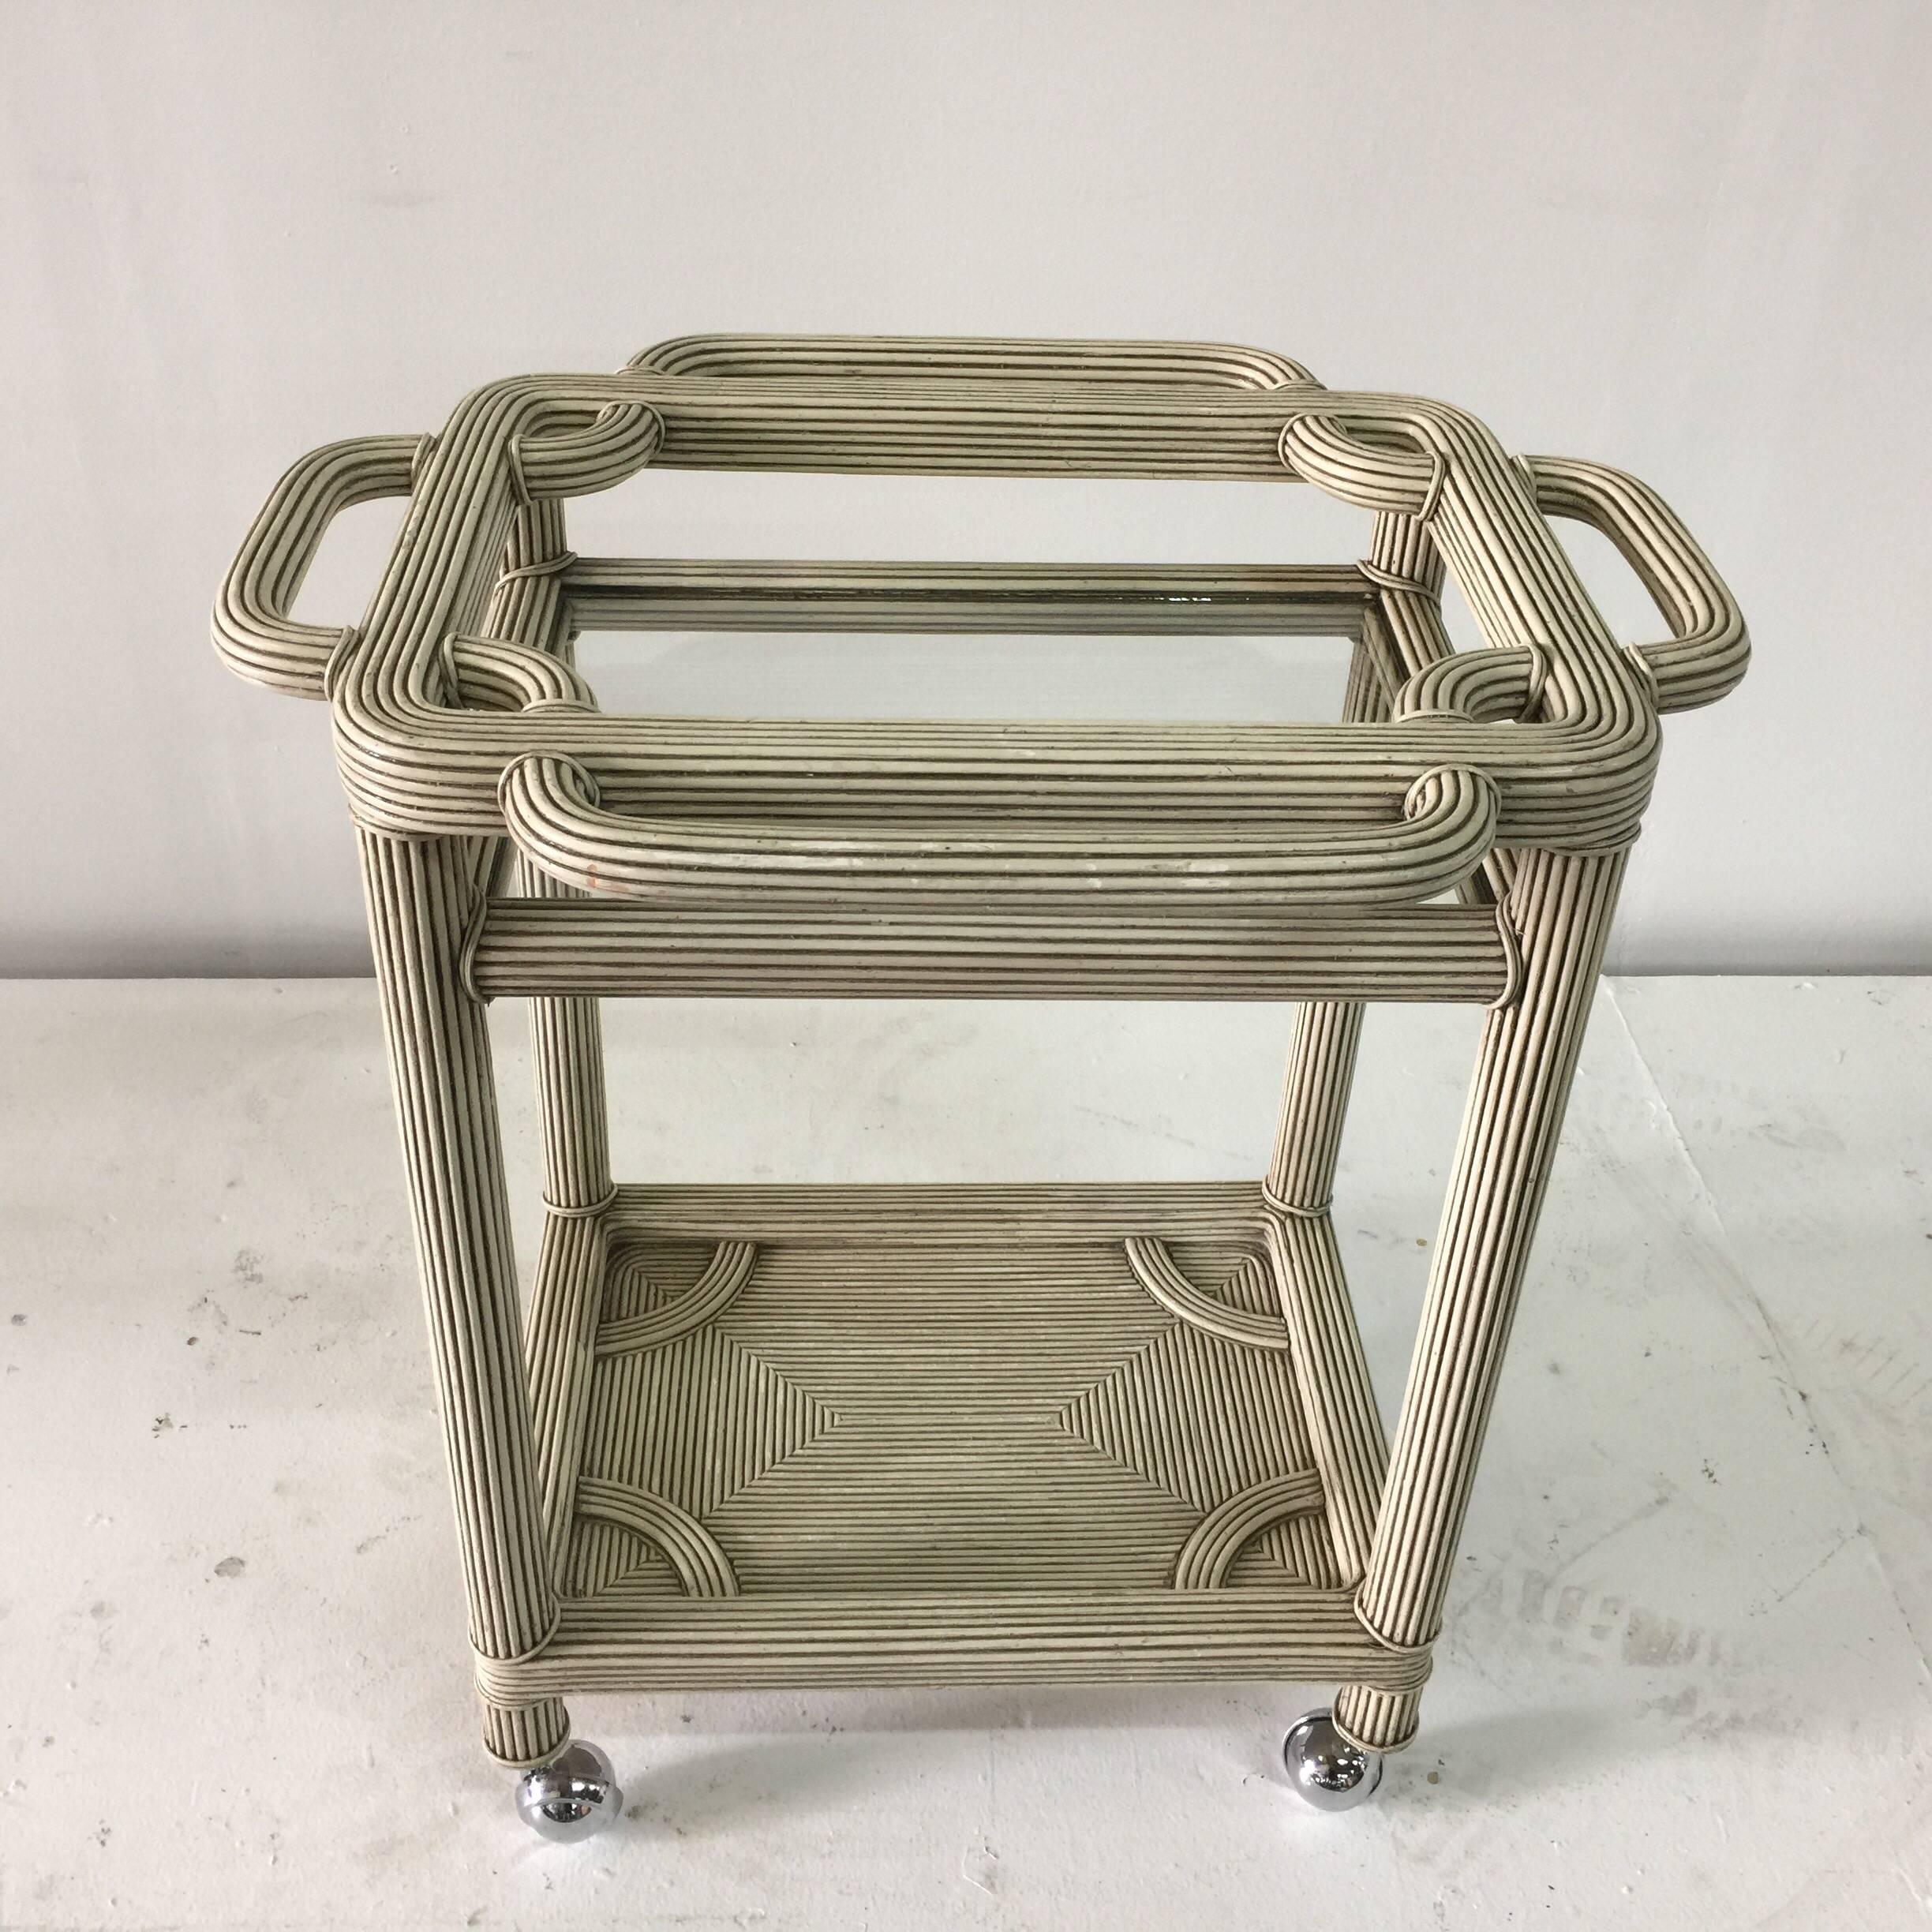 This rolling bar cart is a lovely grey washed natural reed with two tiers. Intricate woven reed in a modern design. Very sturdy with chrome wheels for easy rolling.